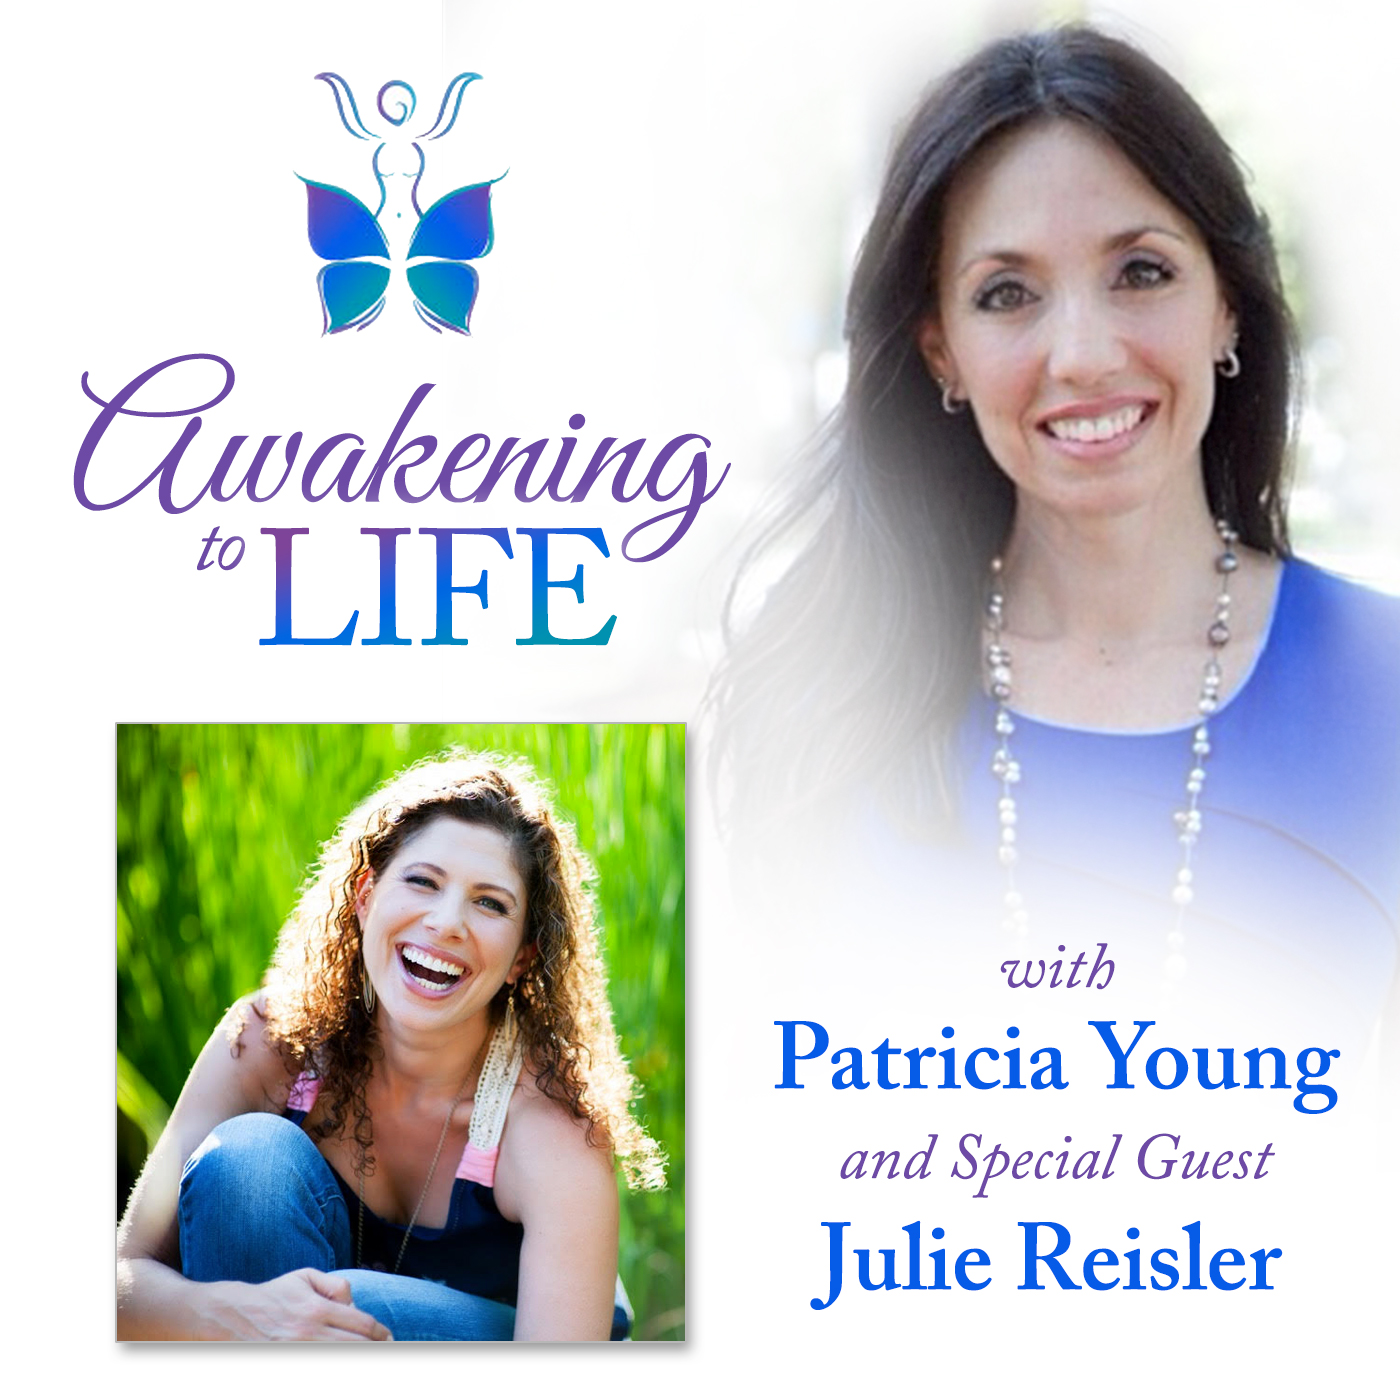 How to Make This Your Best Year Yet by Loving YOU with Julie Reisler